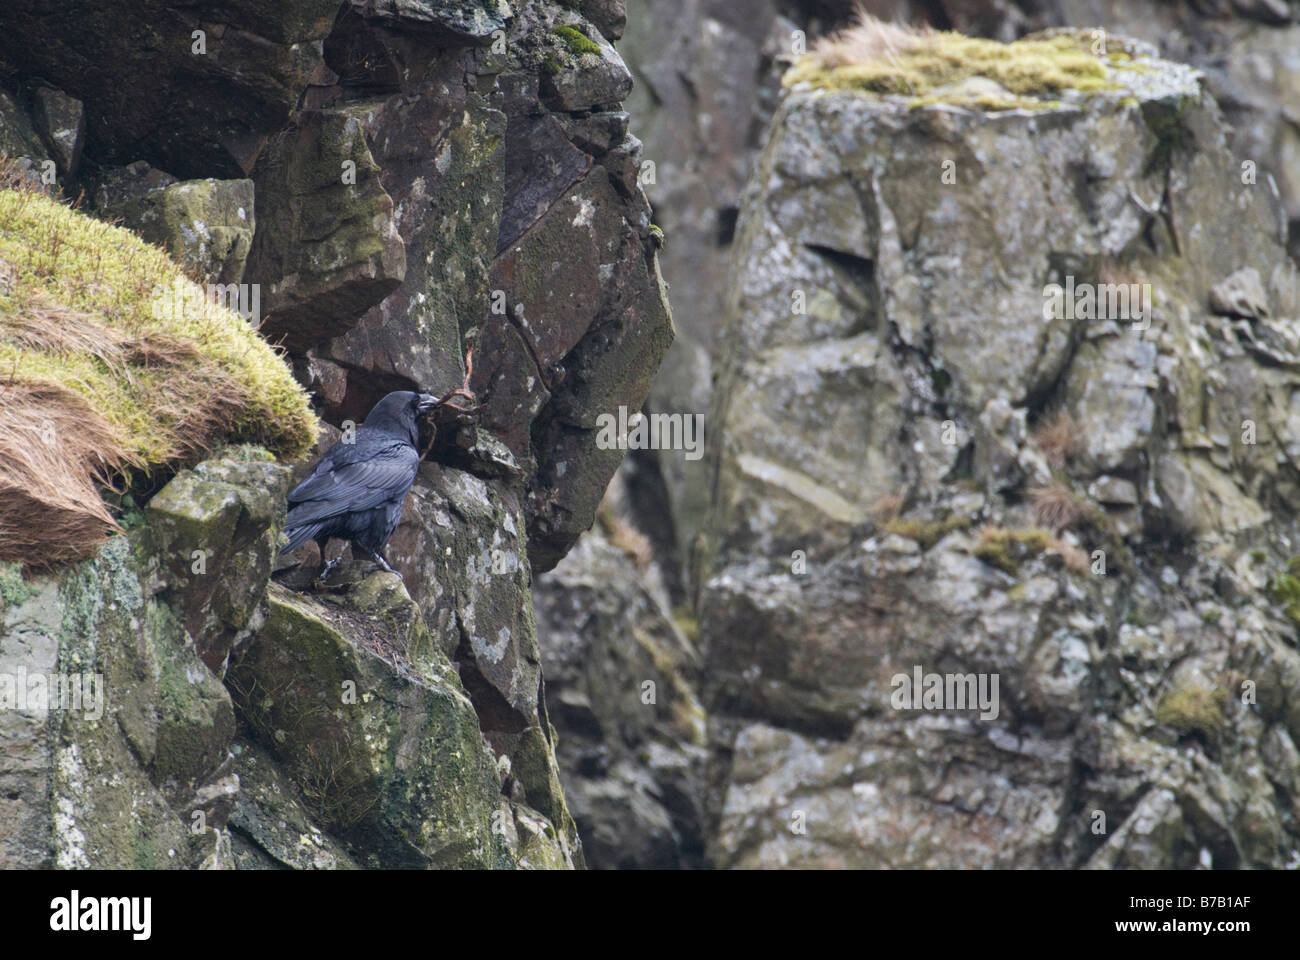 Adult raven Corvus corax bringing in heather stem to construct new nest Dumfries Galloway Scotland April Stock Photo